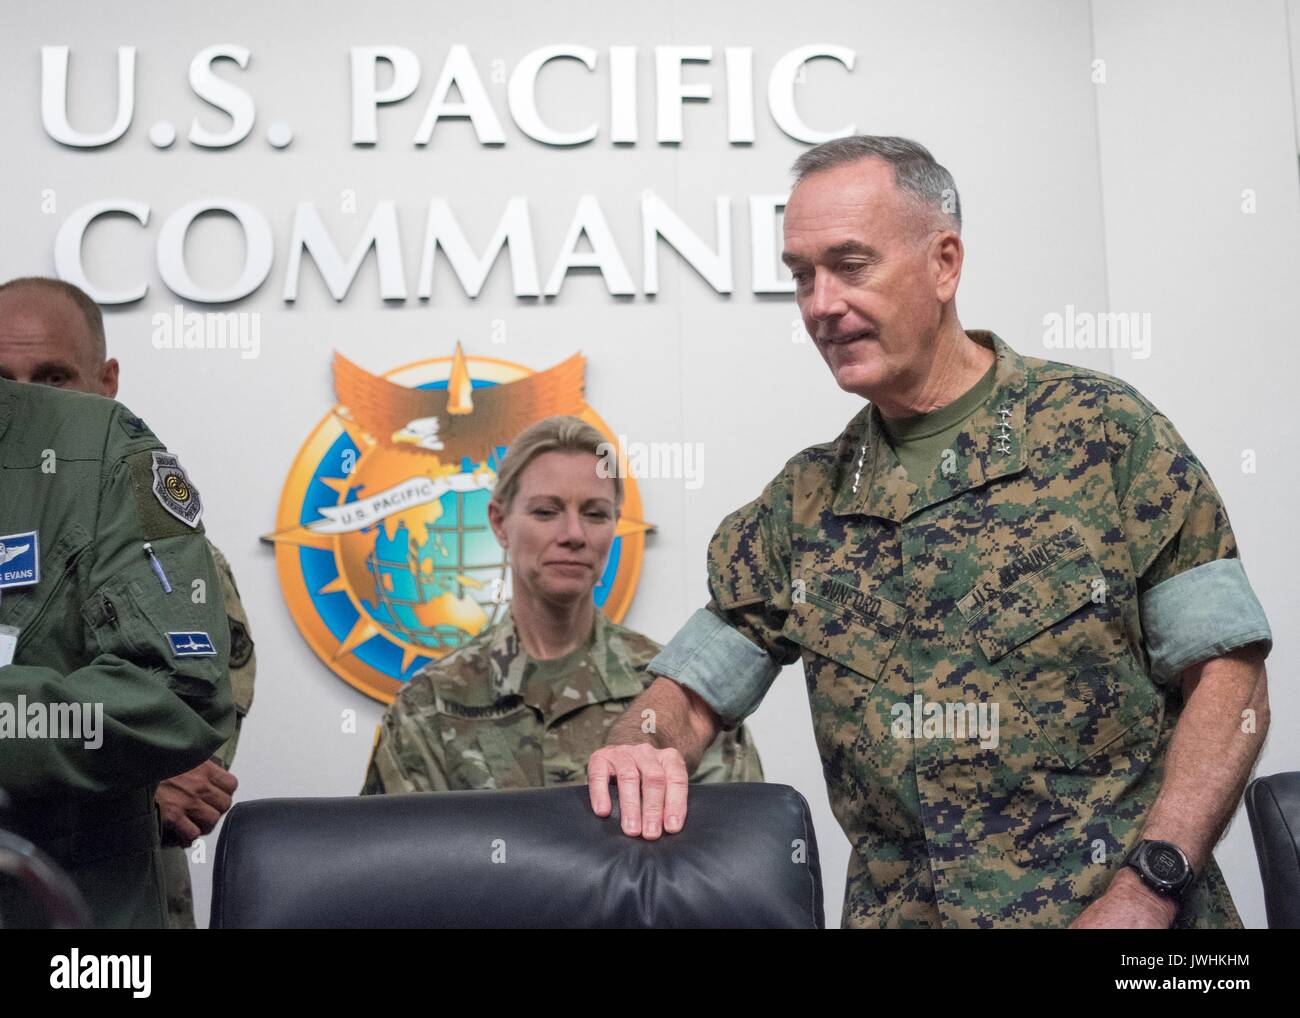 U.S. Chairman of the Joint Chiefs Gen. Joseph Dunford, right, before meeting with commander of the U.S. Pacific Command Adm. Harry Harris in PACOM Headquarters at Joint Base Pearl Harbor-Hickam August 11, 2017 in Honolulu, Hawaii. The two are meeting as tensions rise with North Korea over nuclear and ballistic missiles tests. Stock Photo